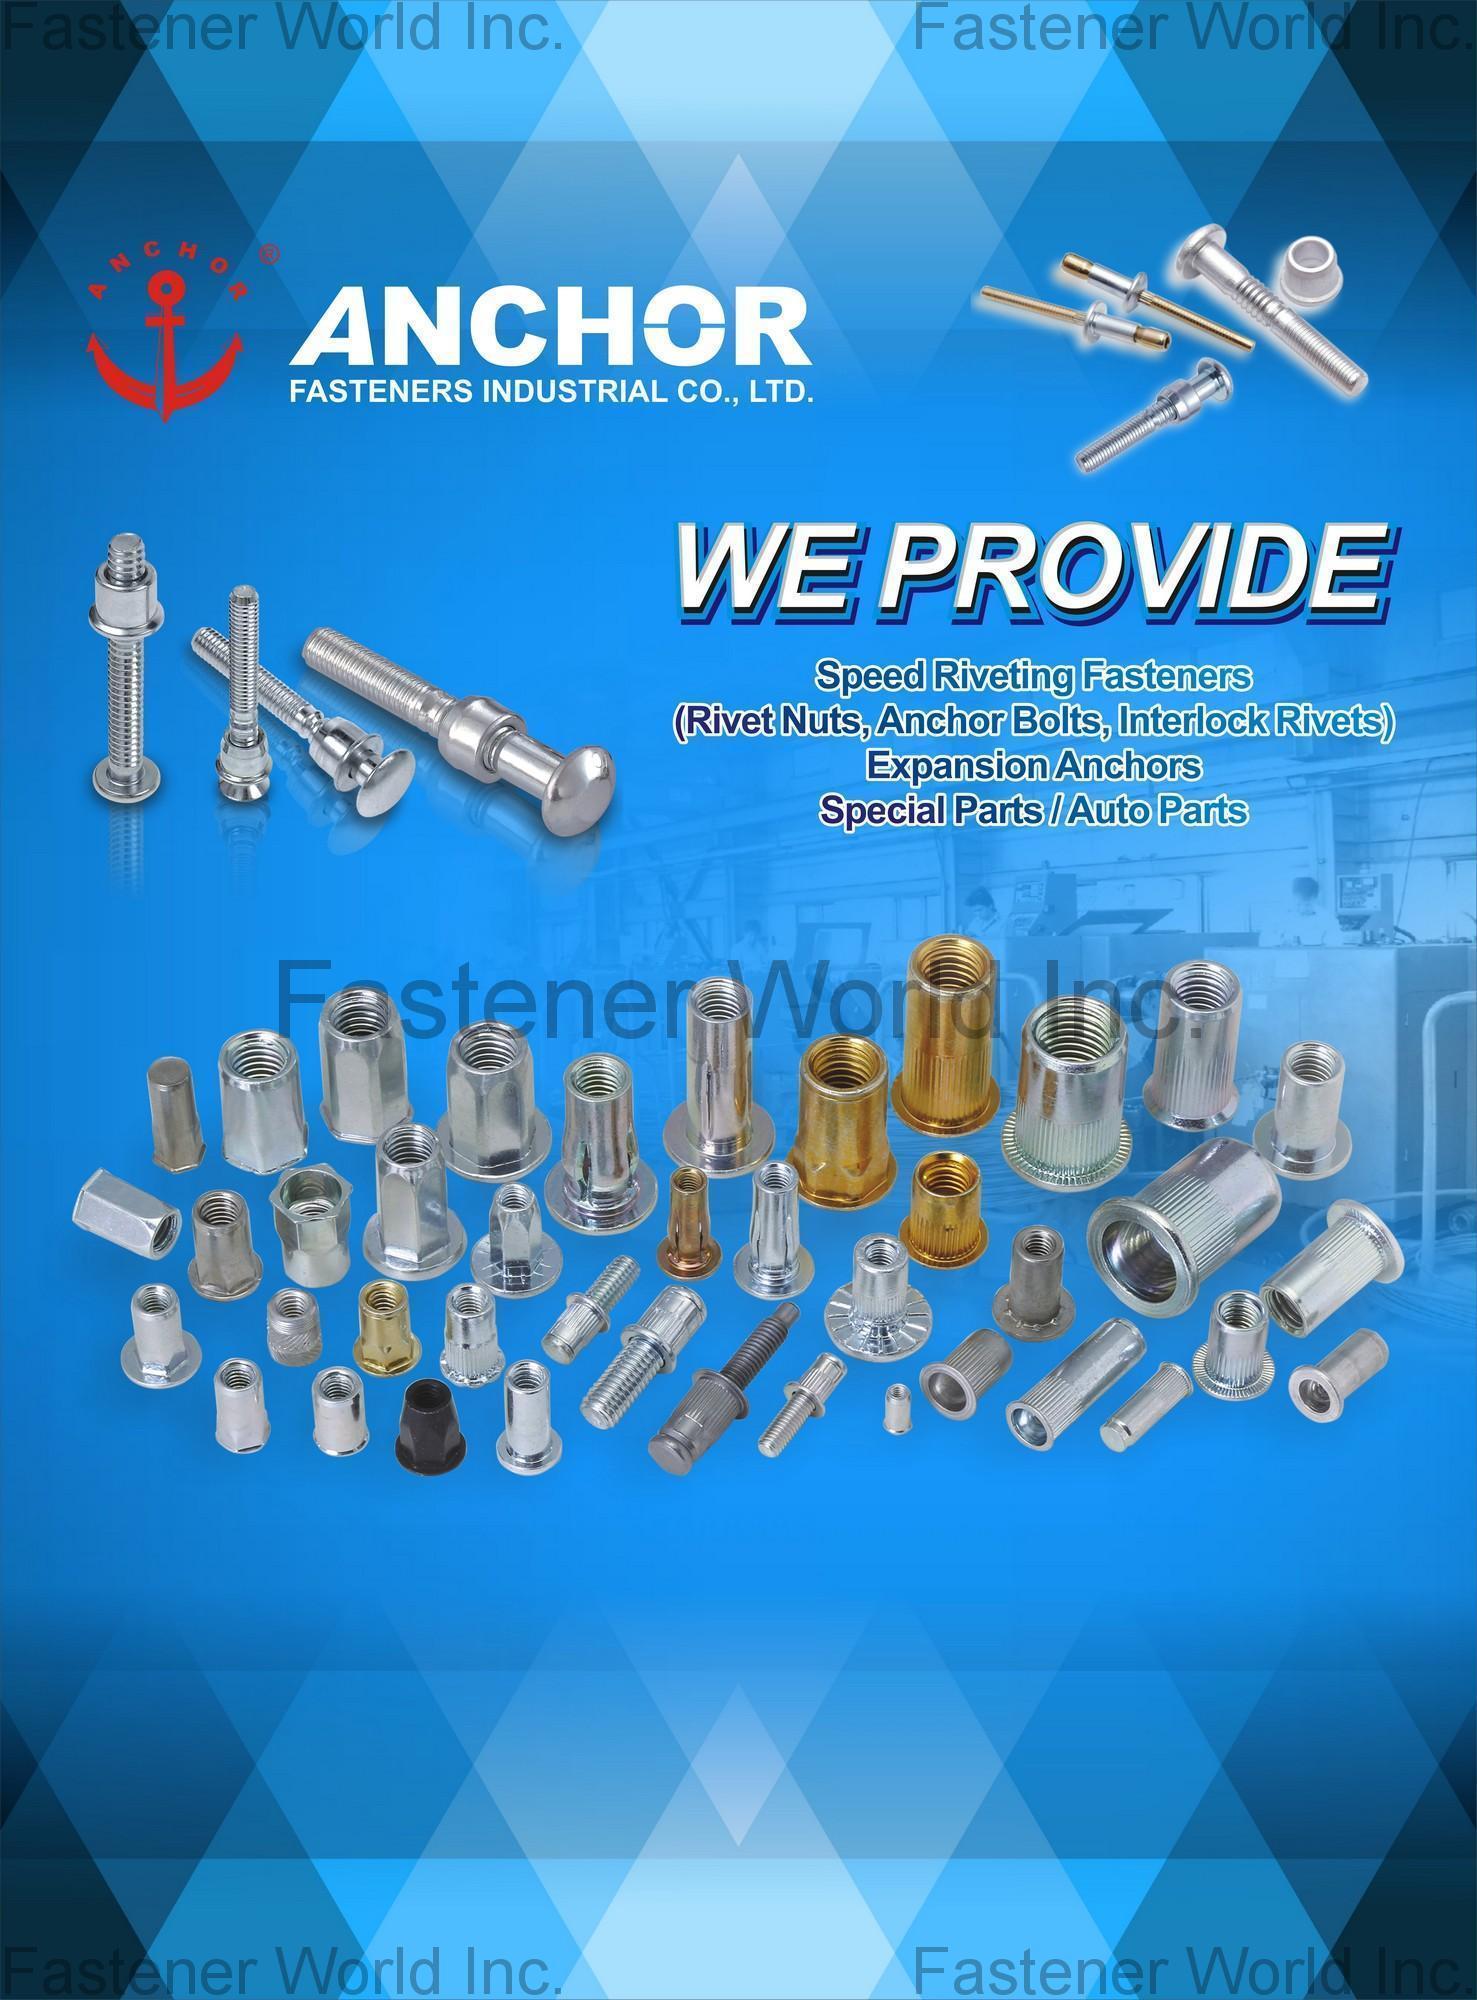 ANCHOR FASTENERS INDUSTRIAL CO., LTD.  , Speed Riveting Fasteners, Rivet Nuts, Anchor Bolts, Interlock Rivets, Expansion Anchors, Special Parts, Auto Parts , Blind Nuts / Rivet Nuts